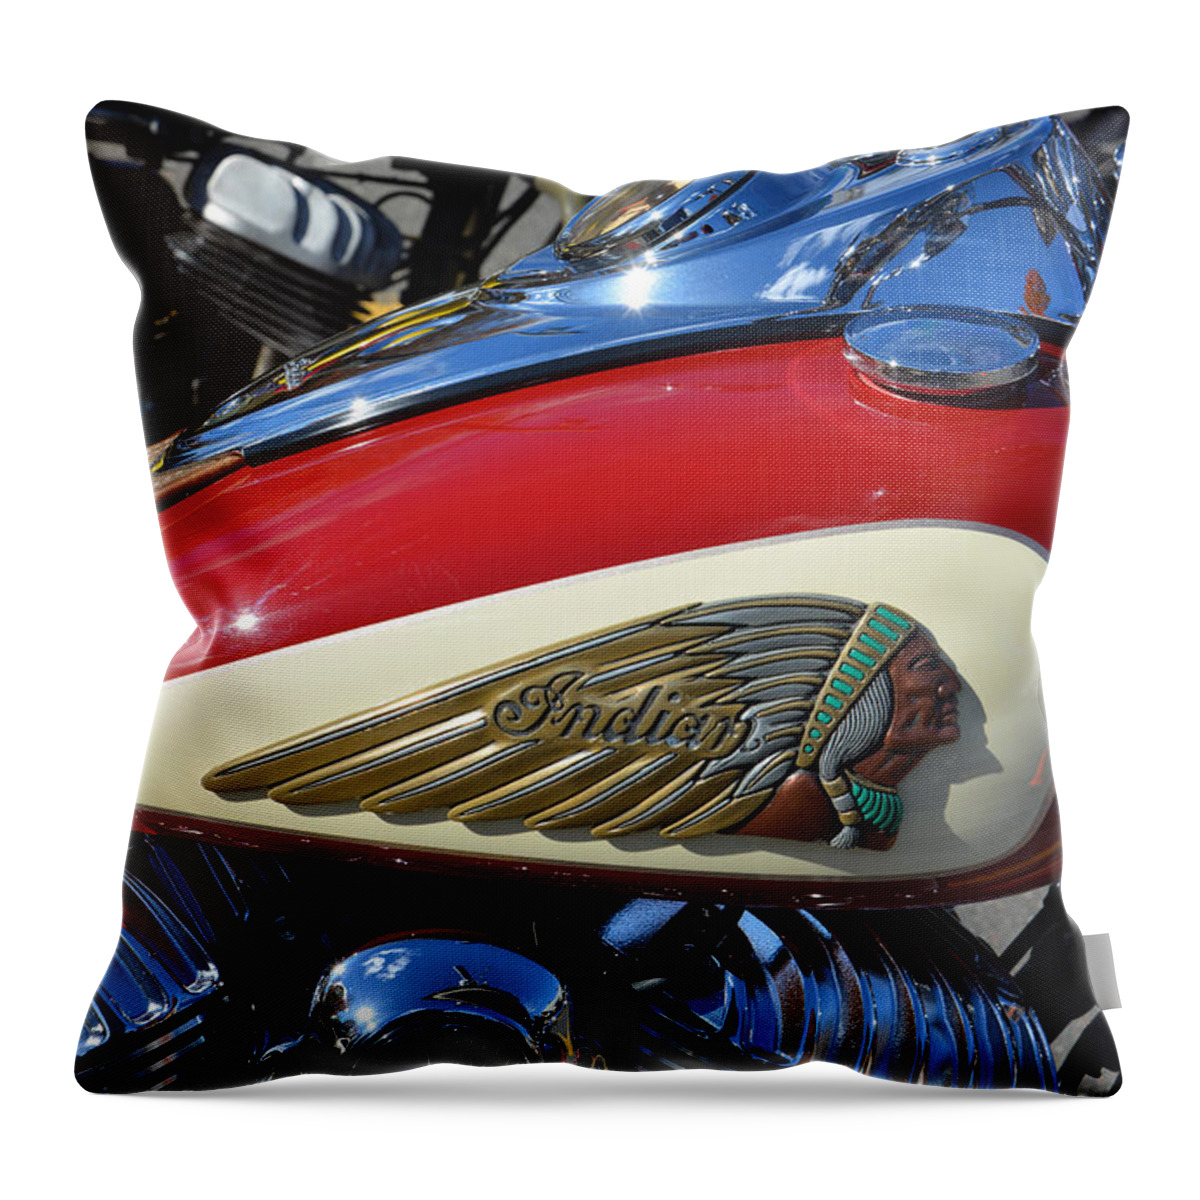 Bike Throw Pillow featuring the photograph Indian Motorcycle Gas Tank by Mike Martin